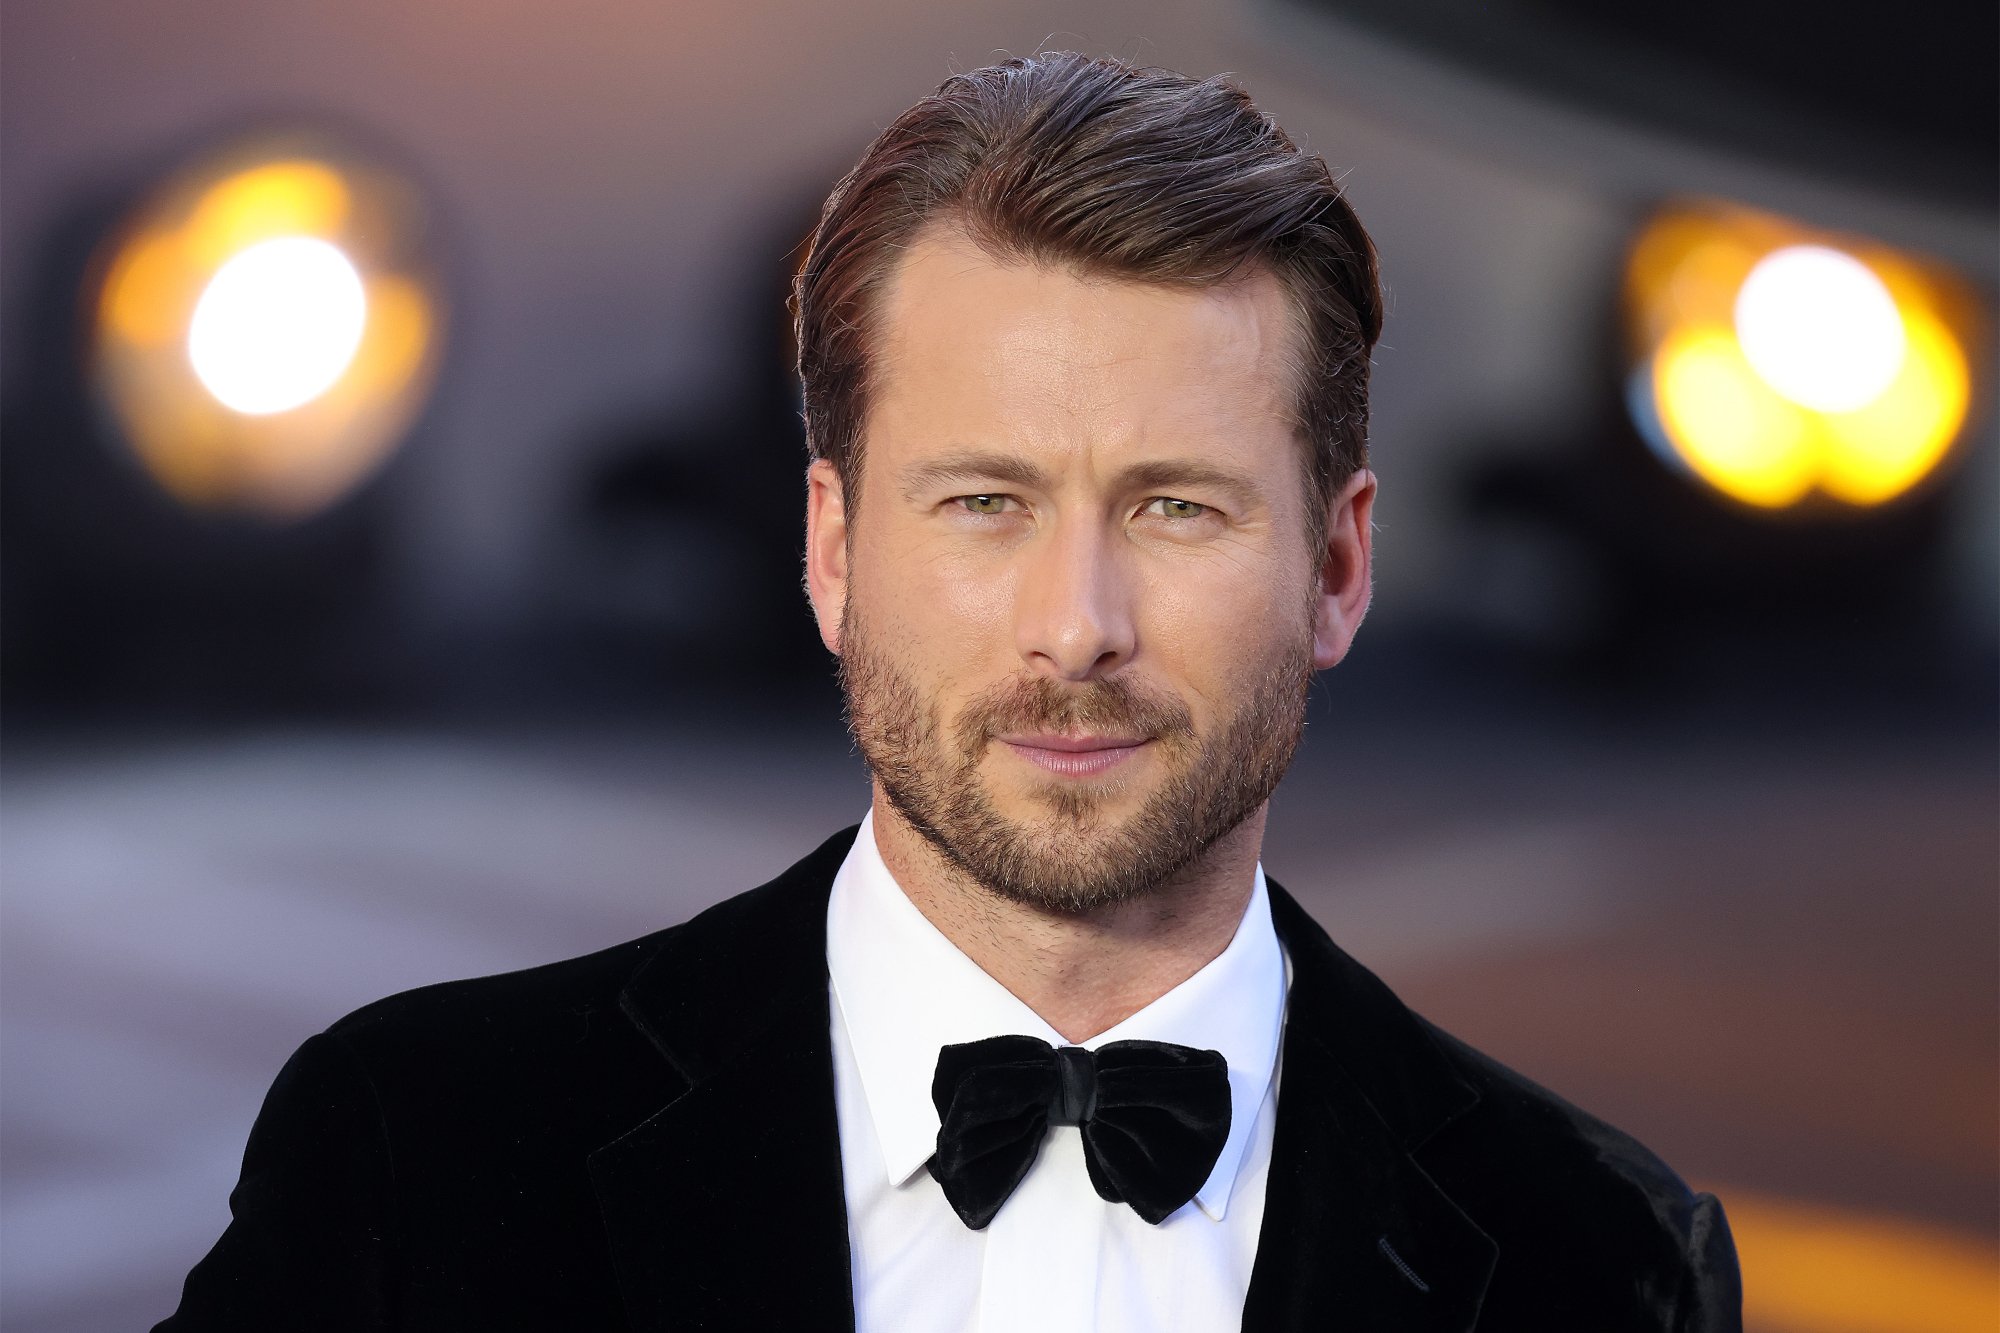 'Top Gun: Maverick' star Glen Powell, who plays Hangman wearing a tuxedo with blurred out lights in the background